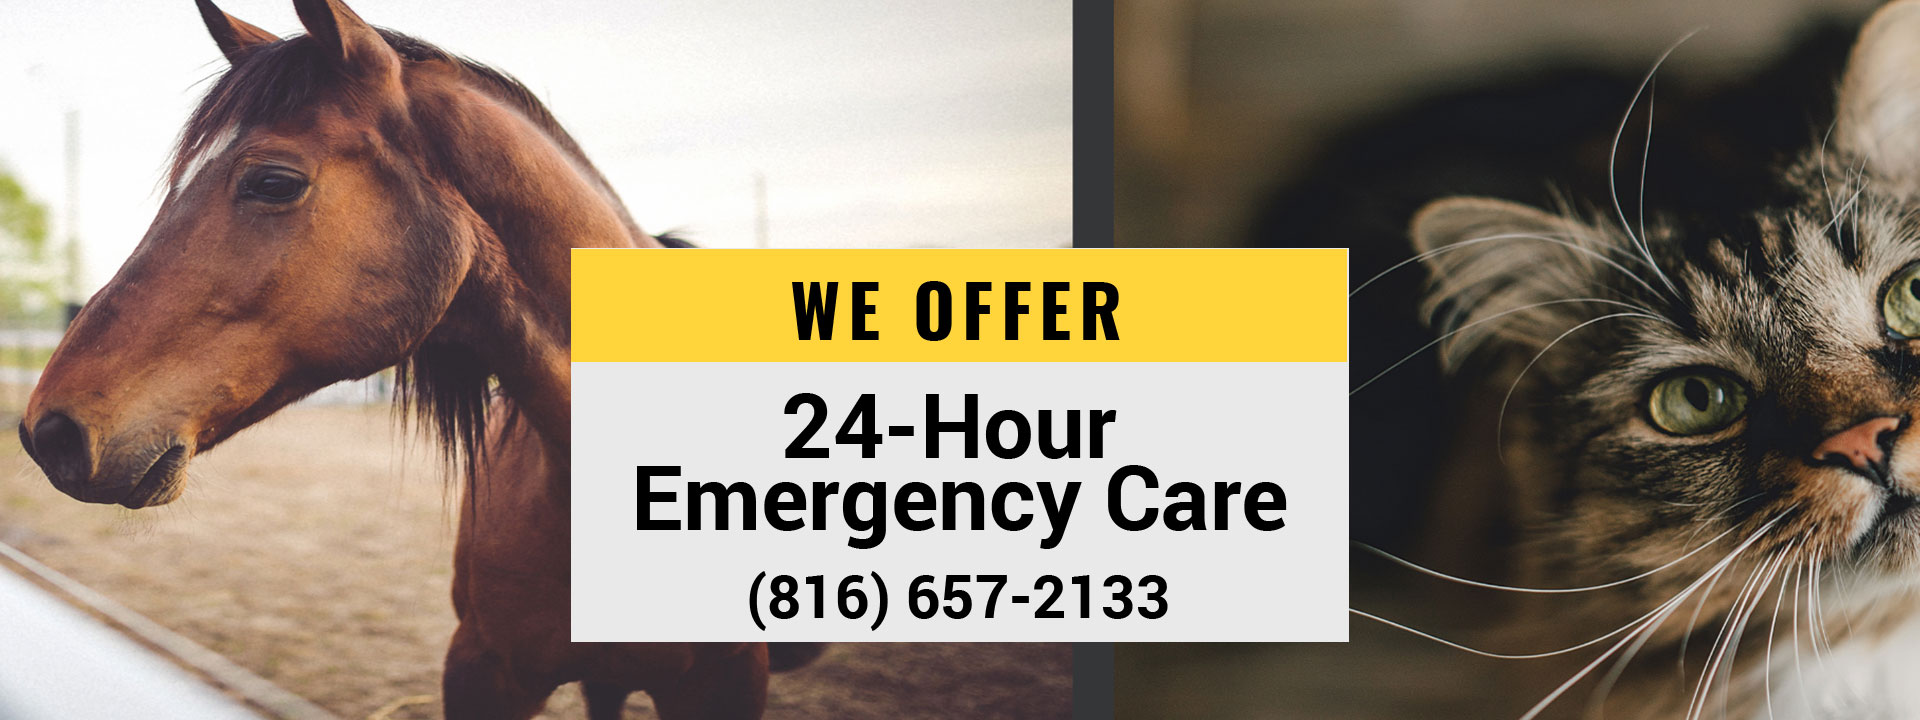 We offer 24-hour emergency care for your pets (816) 657-2133